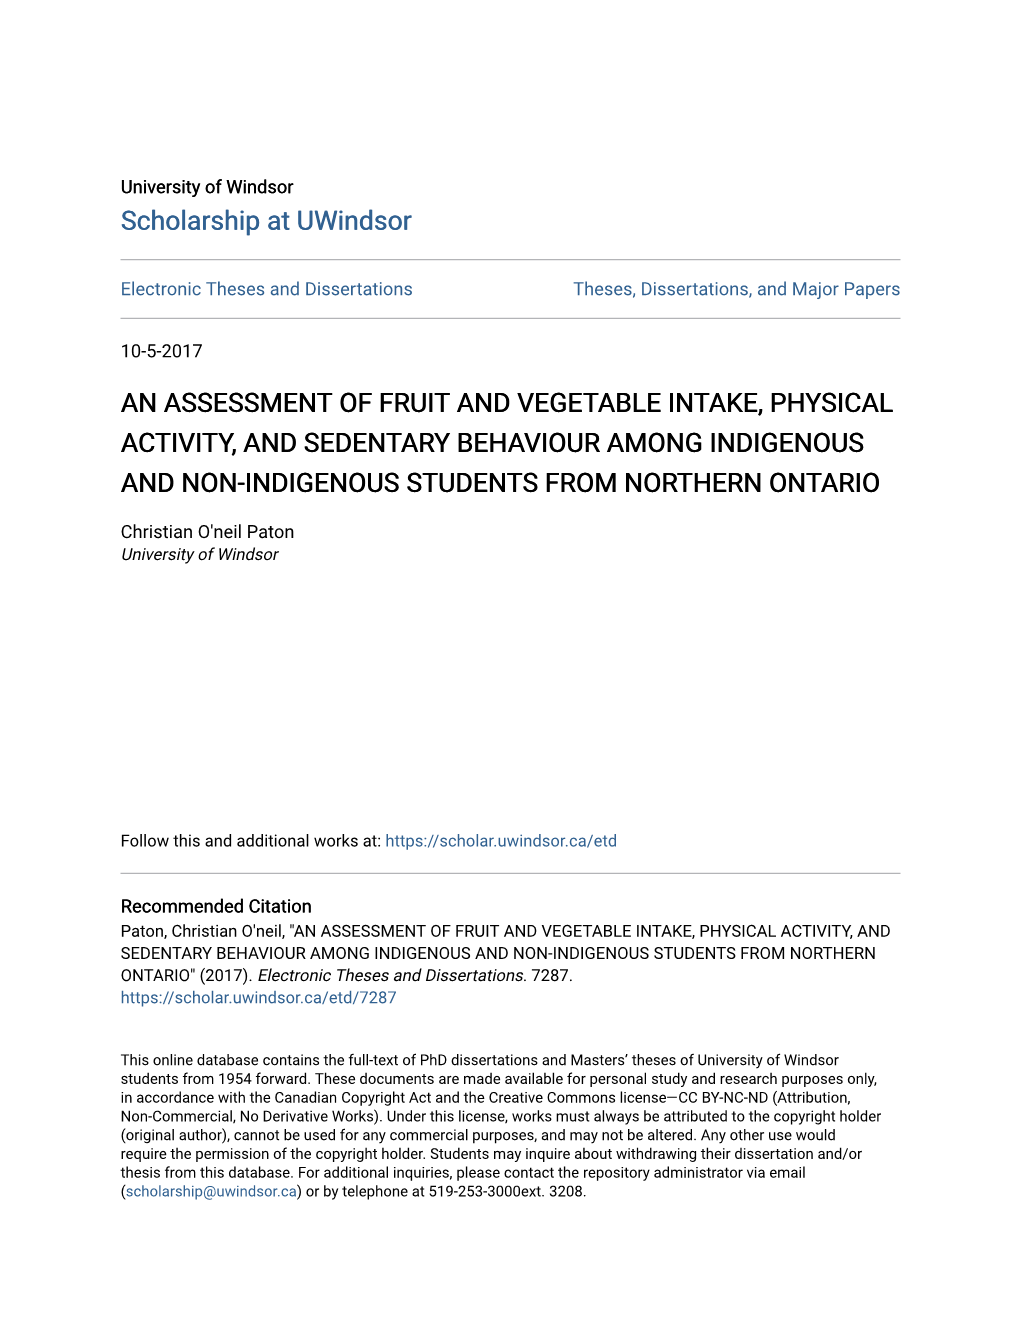 An Assessment of Fruit and Vegetable Intake, Physical Activity, and Sedentary Behaviour Among Indigenous and Non-Indigenous Students from Northern Ontario